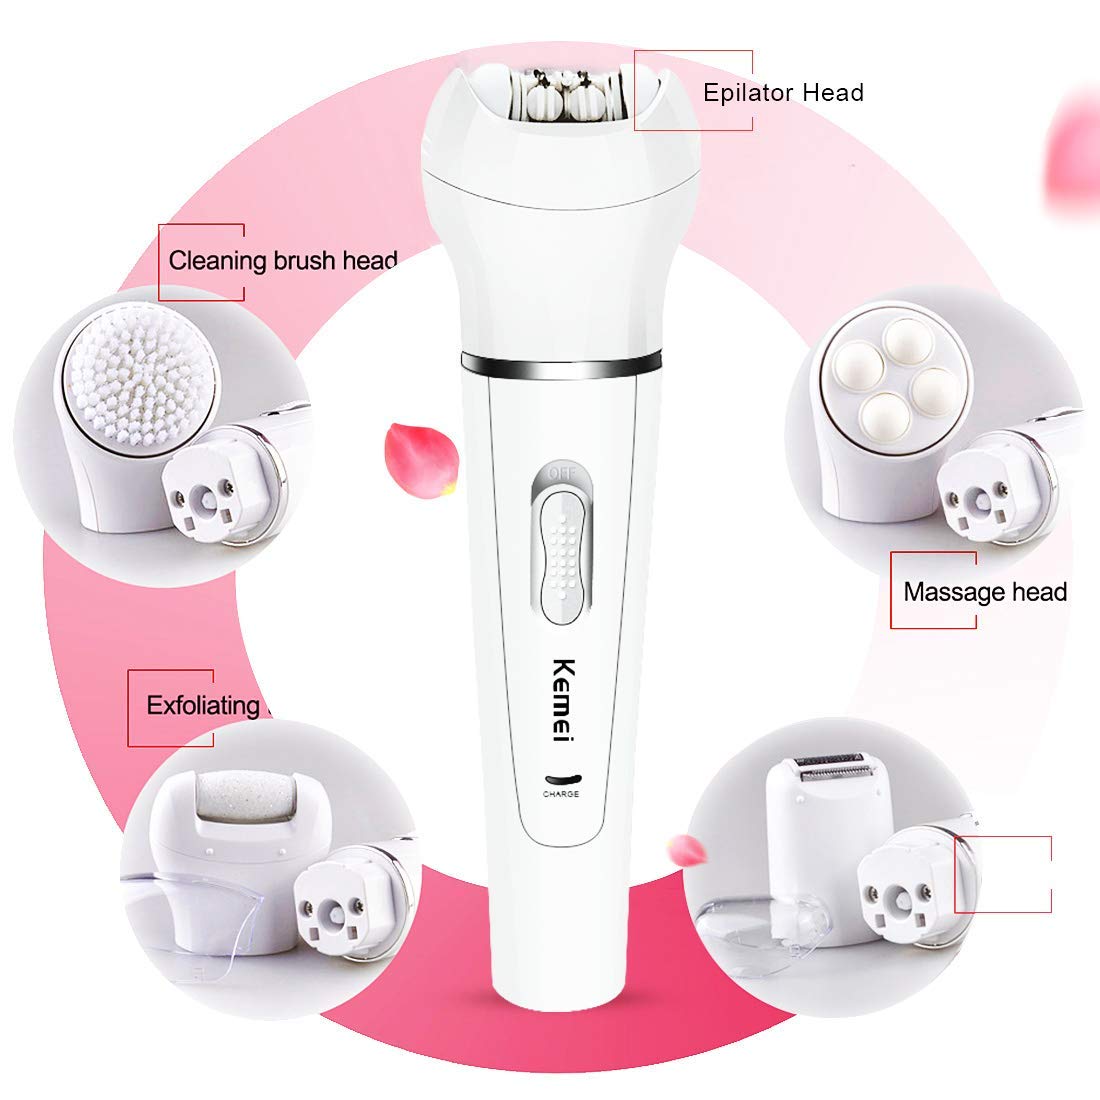 Browns – 5 in 1 Beauty Tools Kit – Epilator, Cleansing Brush, Massager, Lady Shaver, Callus Remover – Model: BS-2199